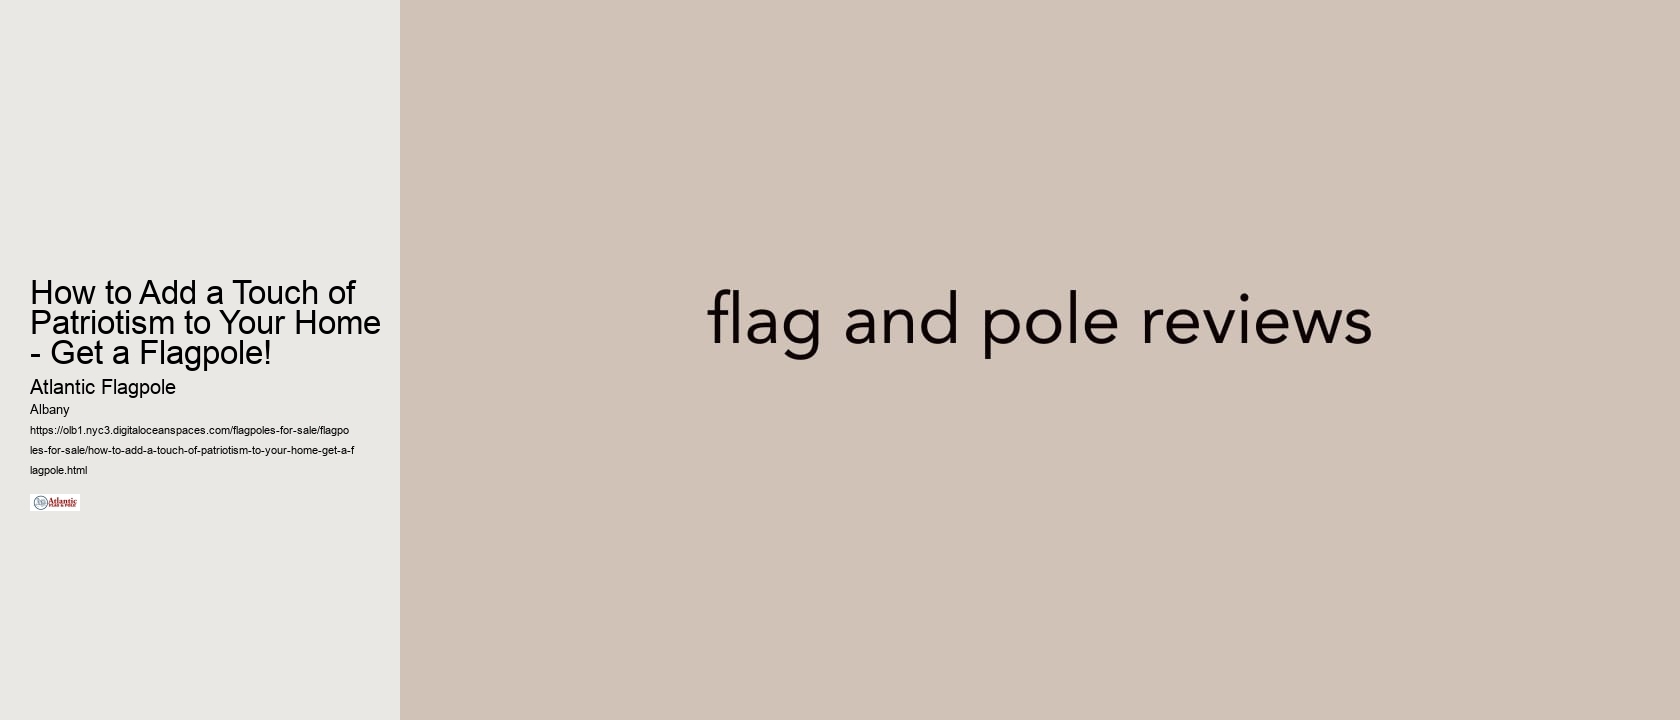 How to Add a Touch of Patriotism to Your Home - Get a Flagpole!